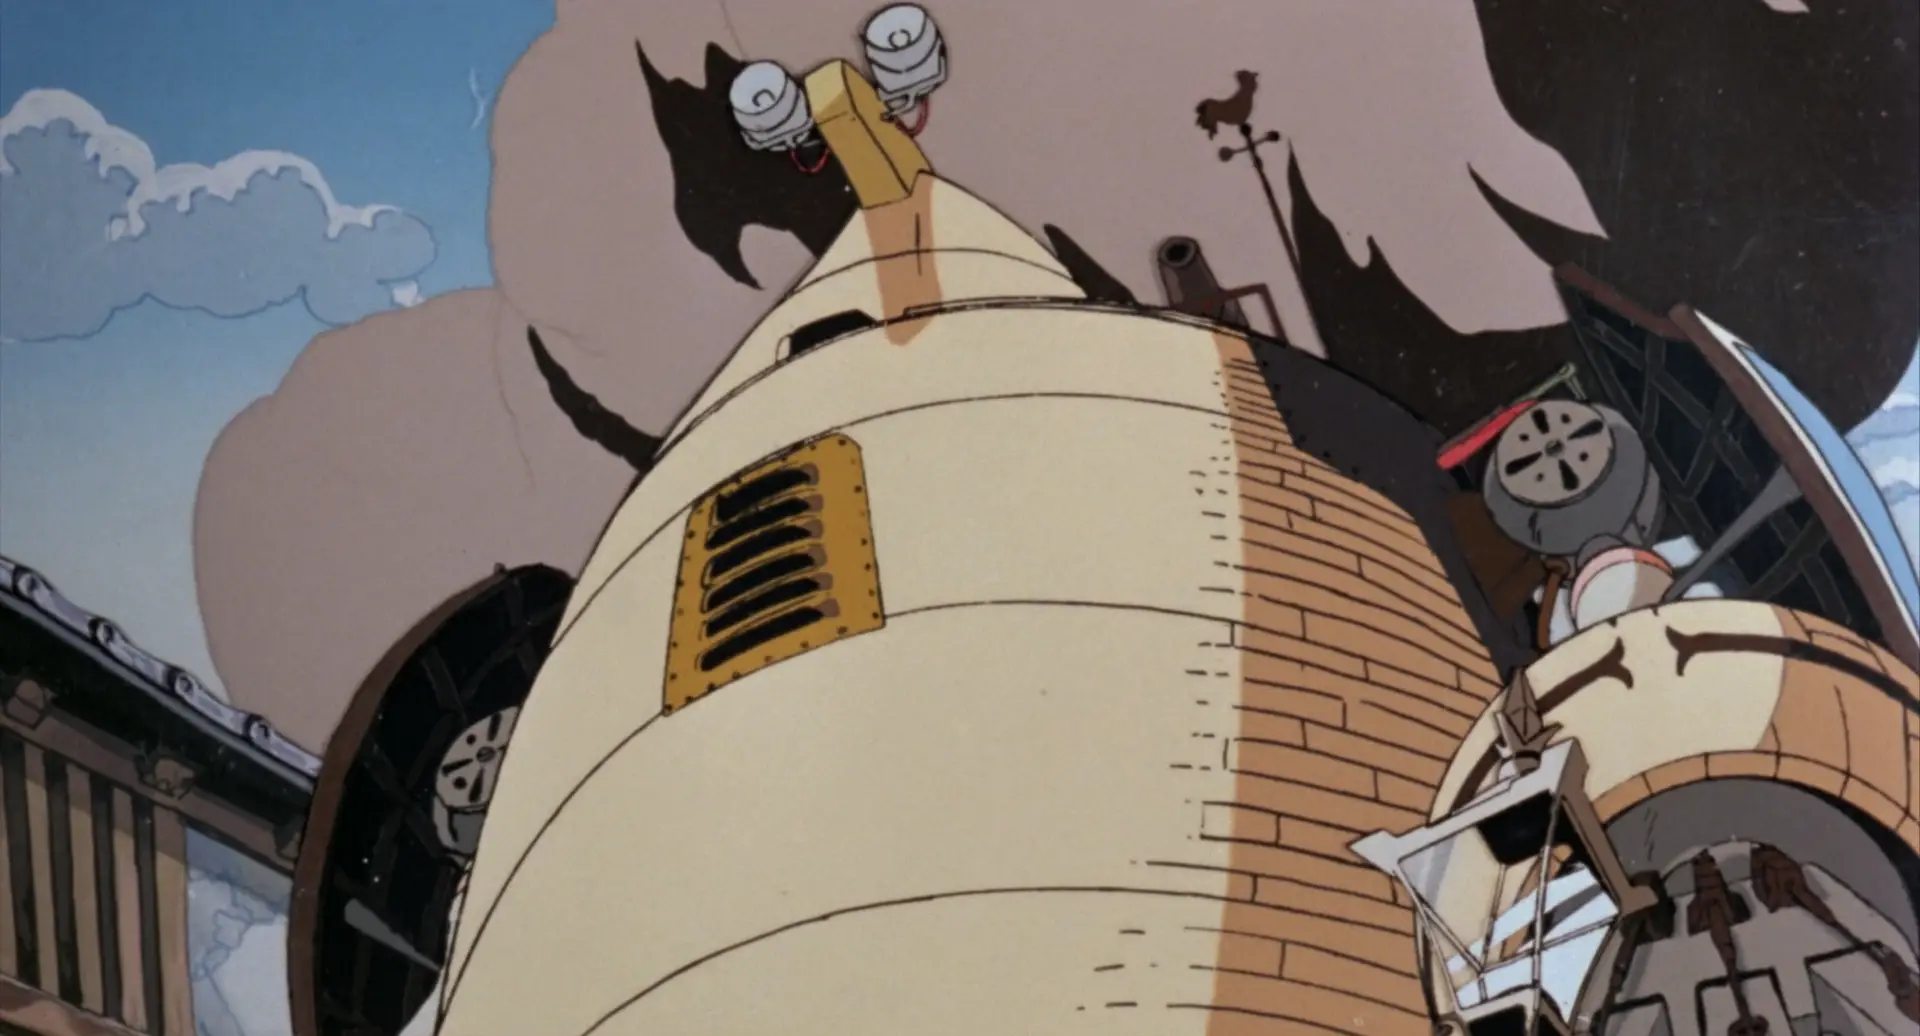 Still from Westerner's Invasion. The Western robot is shown from a low angle.